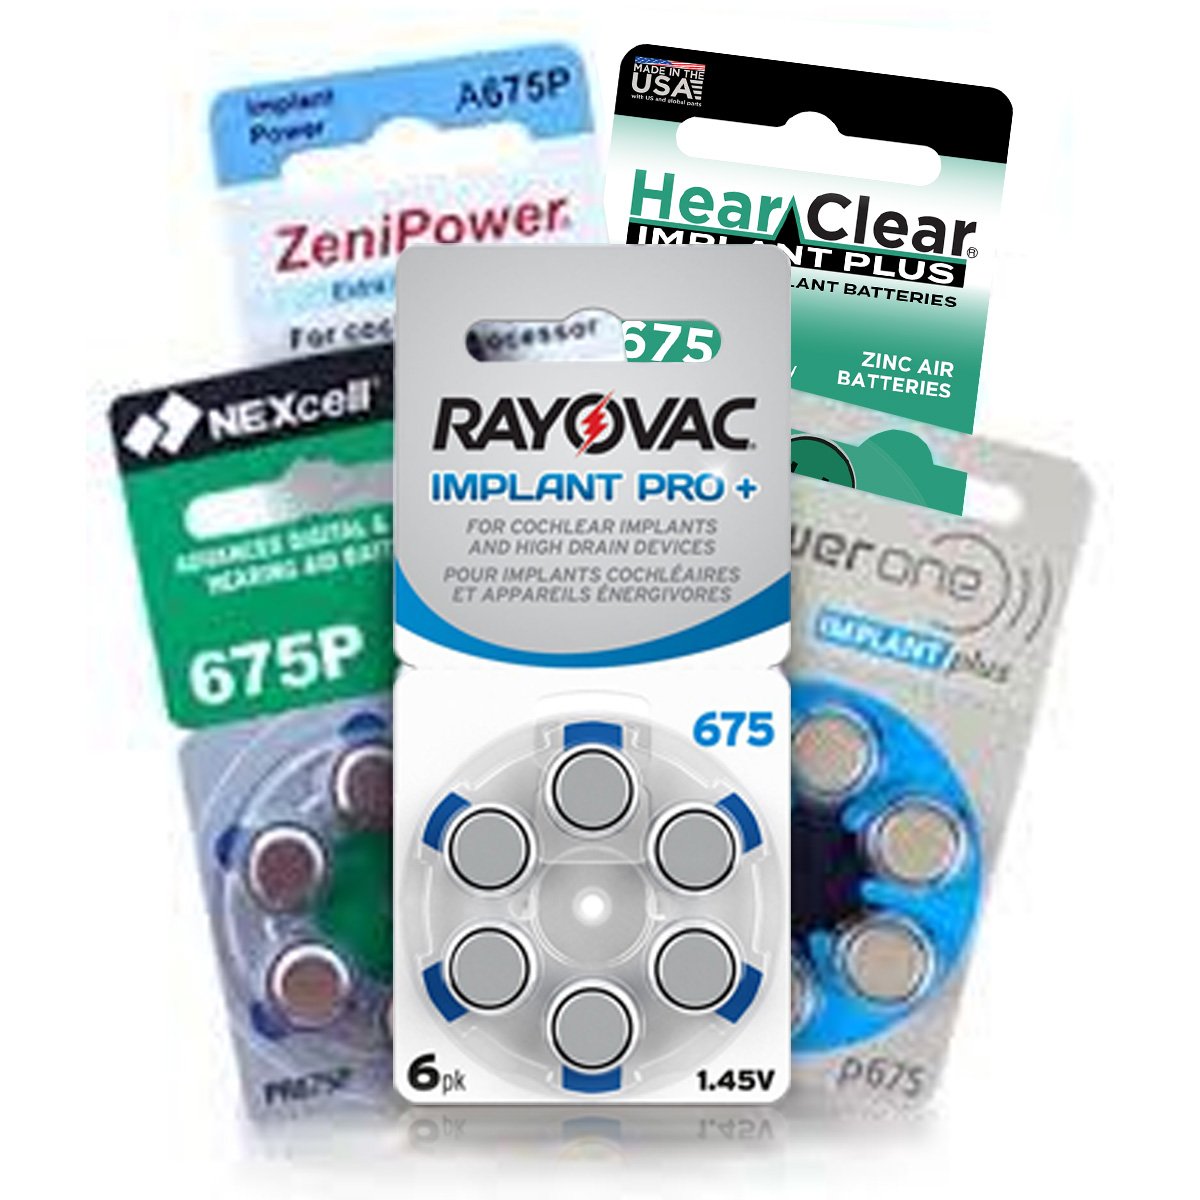 Trial Pack 675HP Cochlear Implant Batteries, Four models, 24 cells